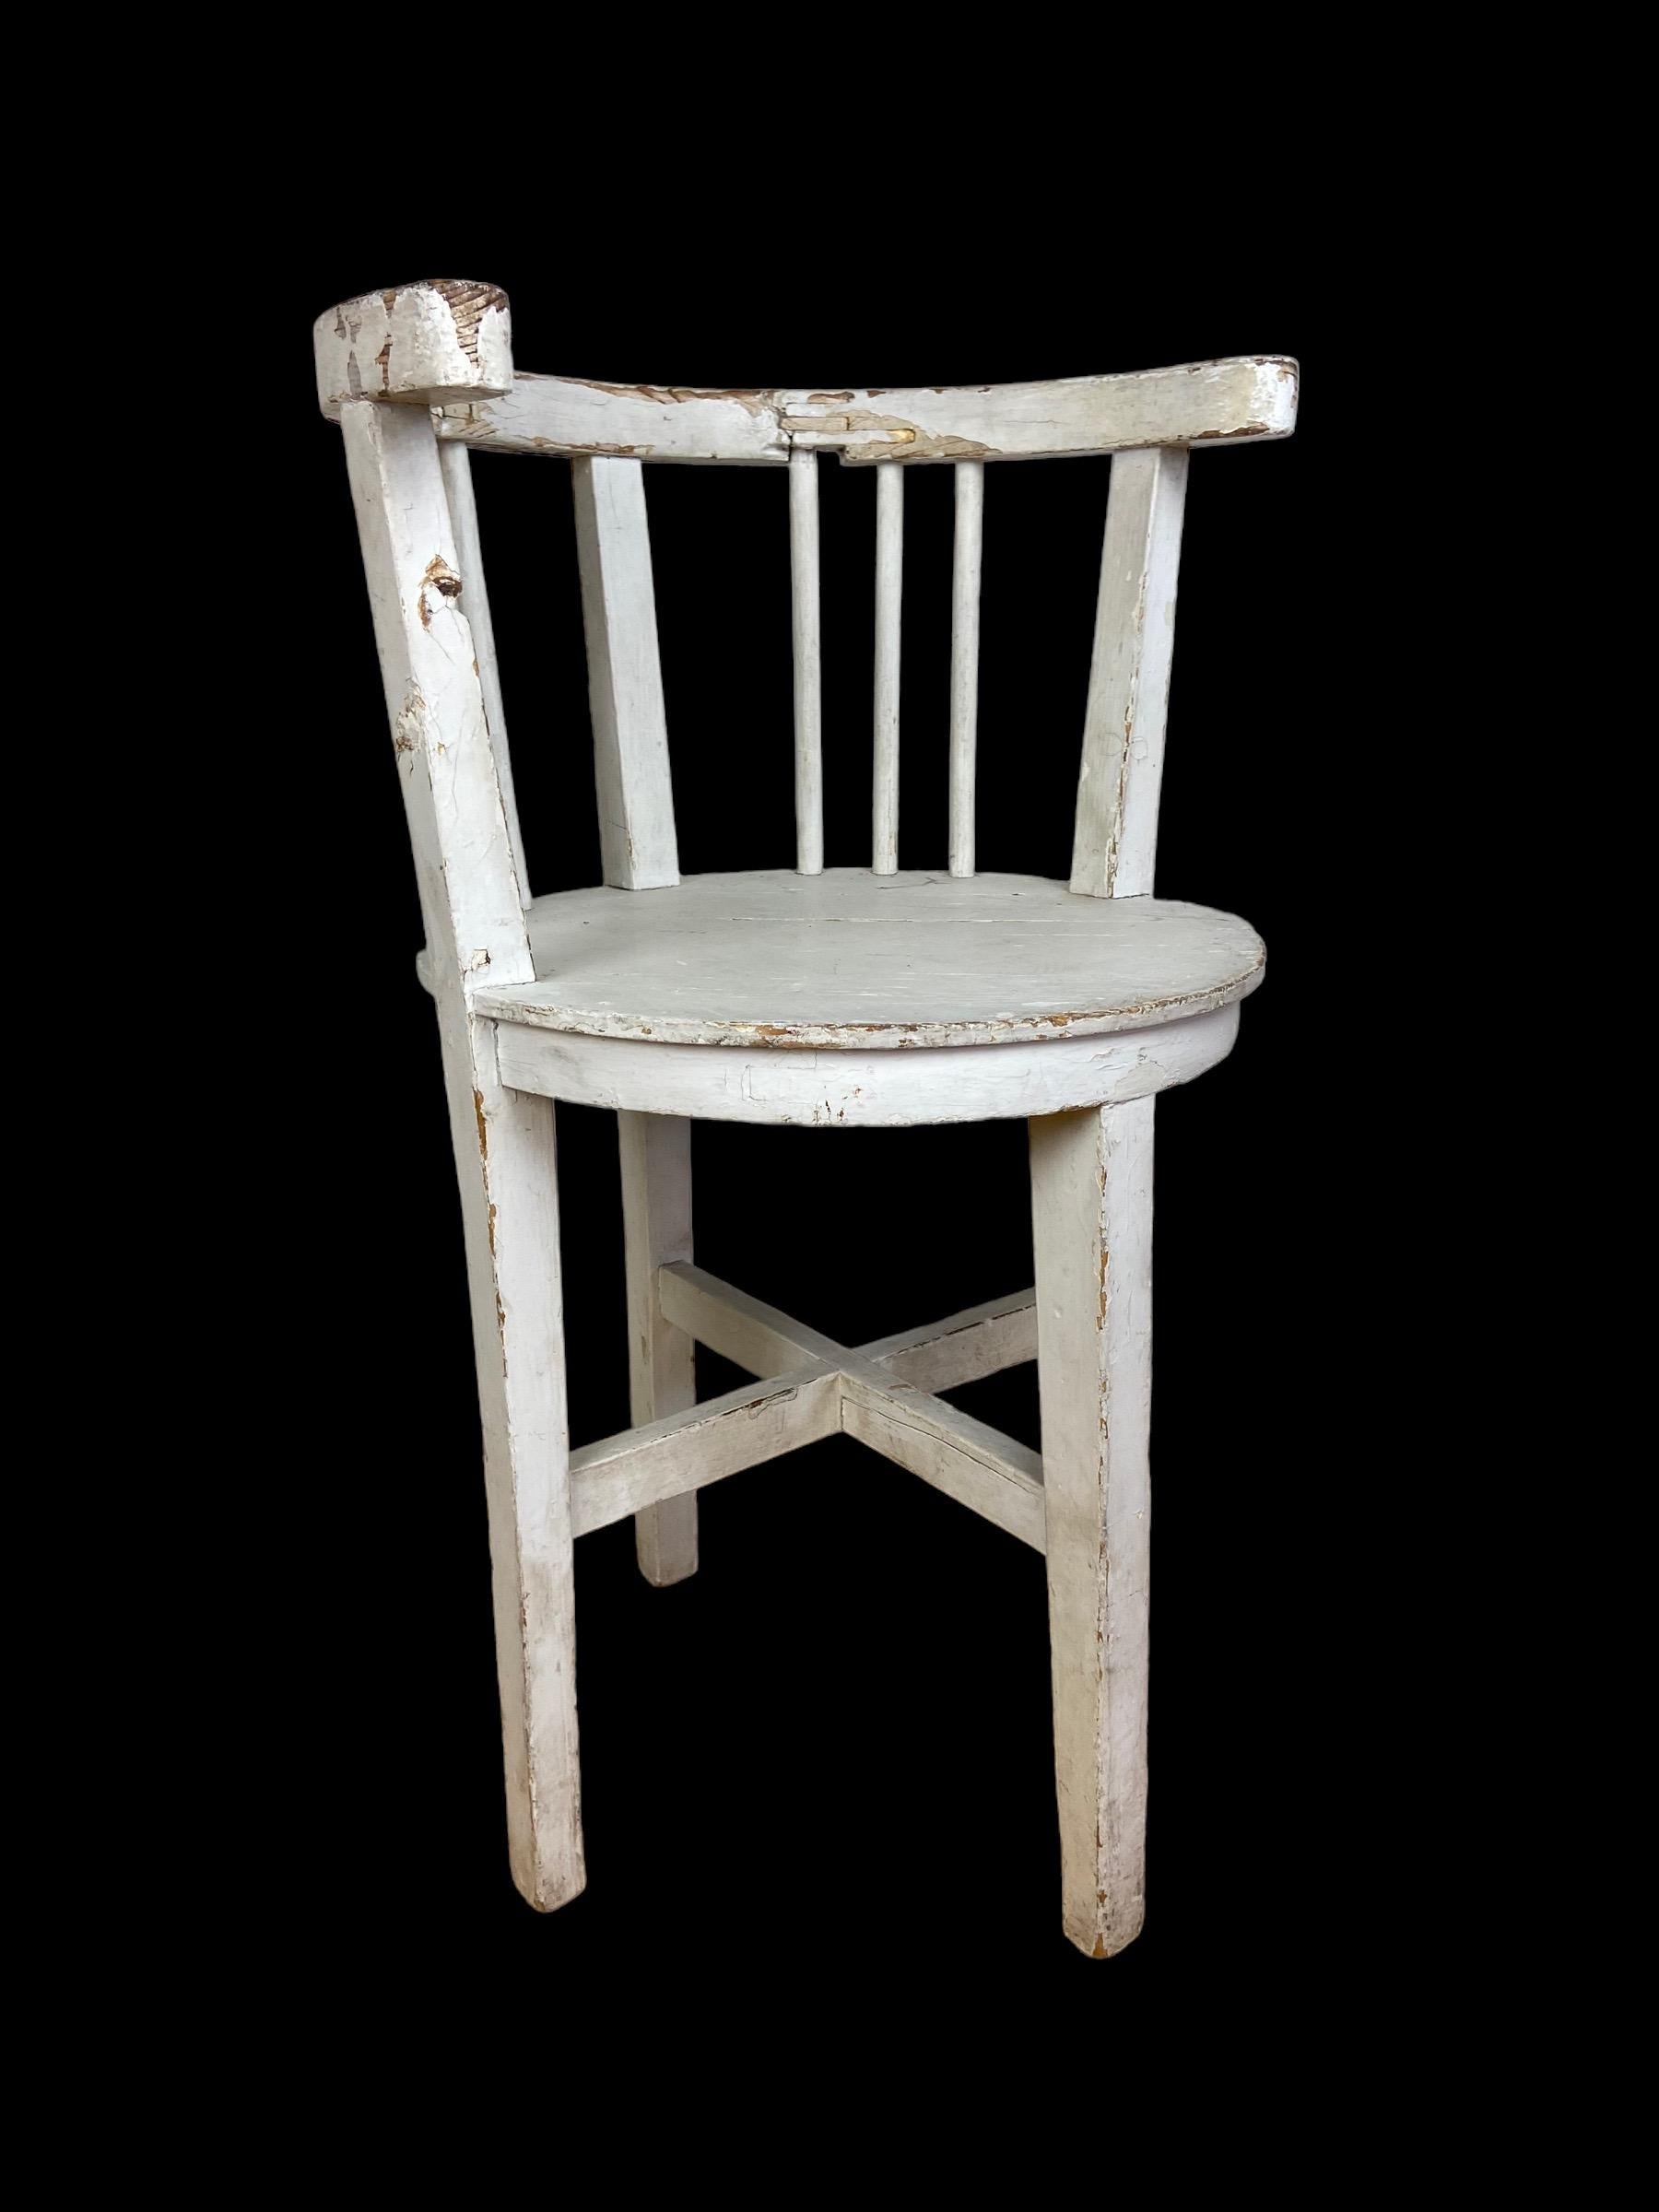 White Art Deco chair from France. Made in the 1930s.

seating height 49 cm height 77 cm diameter 43 cm.